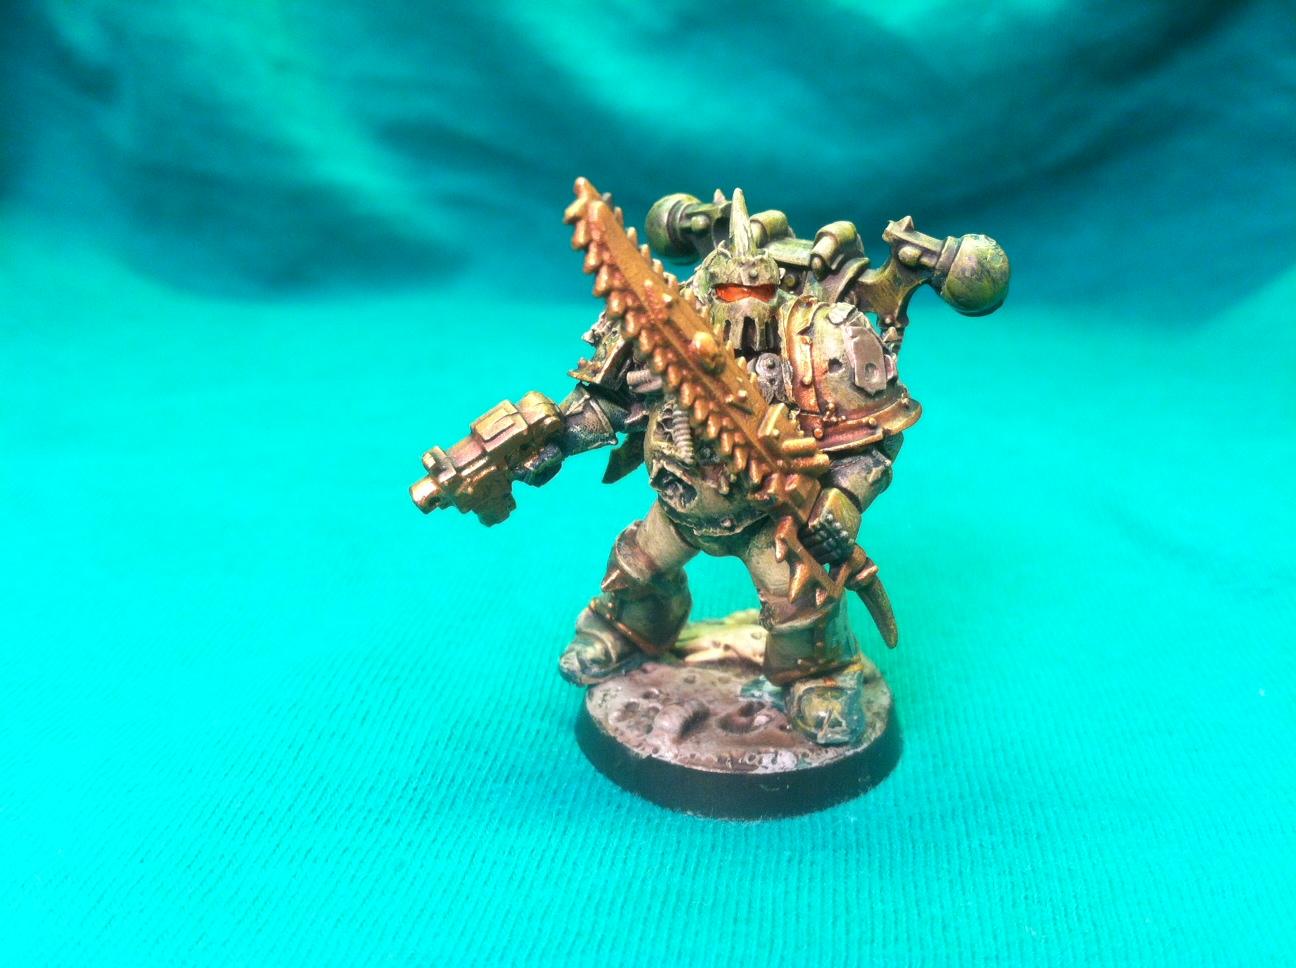 here is one of the Plague Marines in the box as well, so glad my friend convinced me to do this